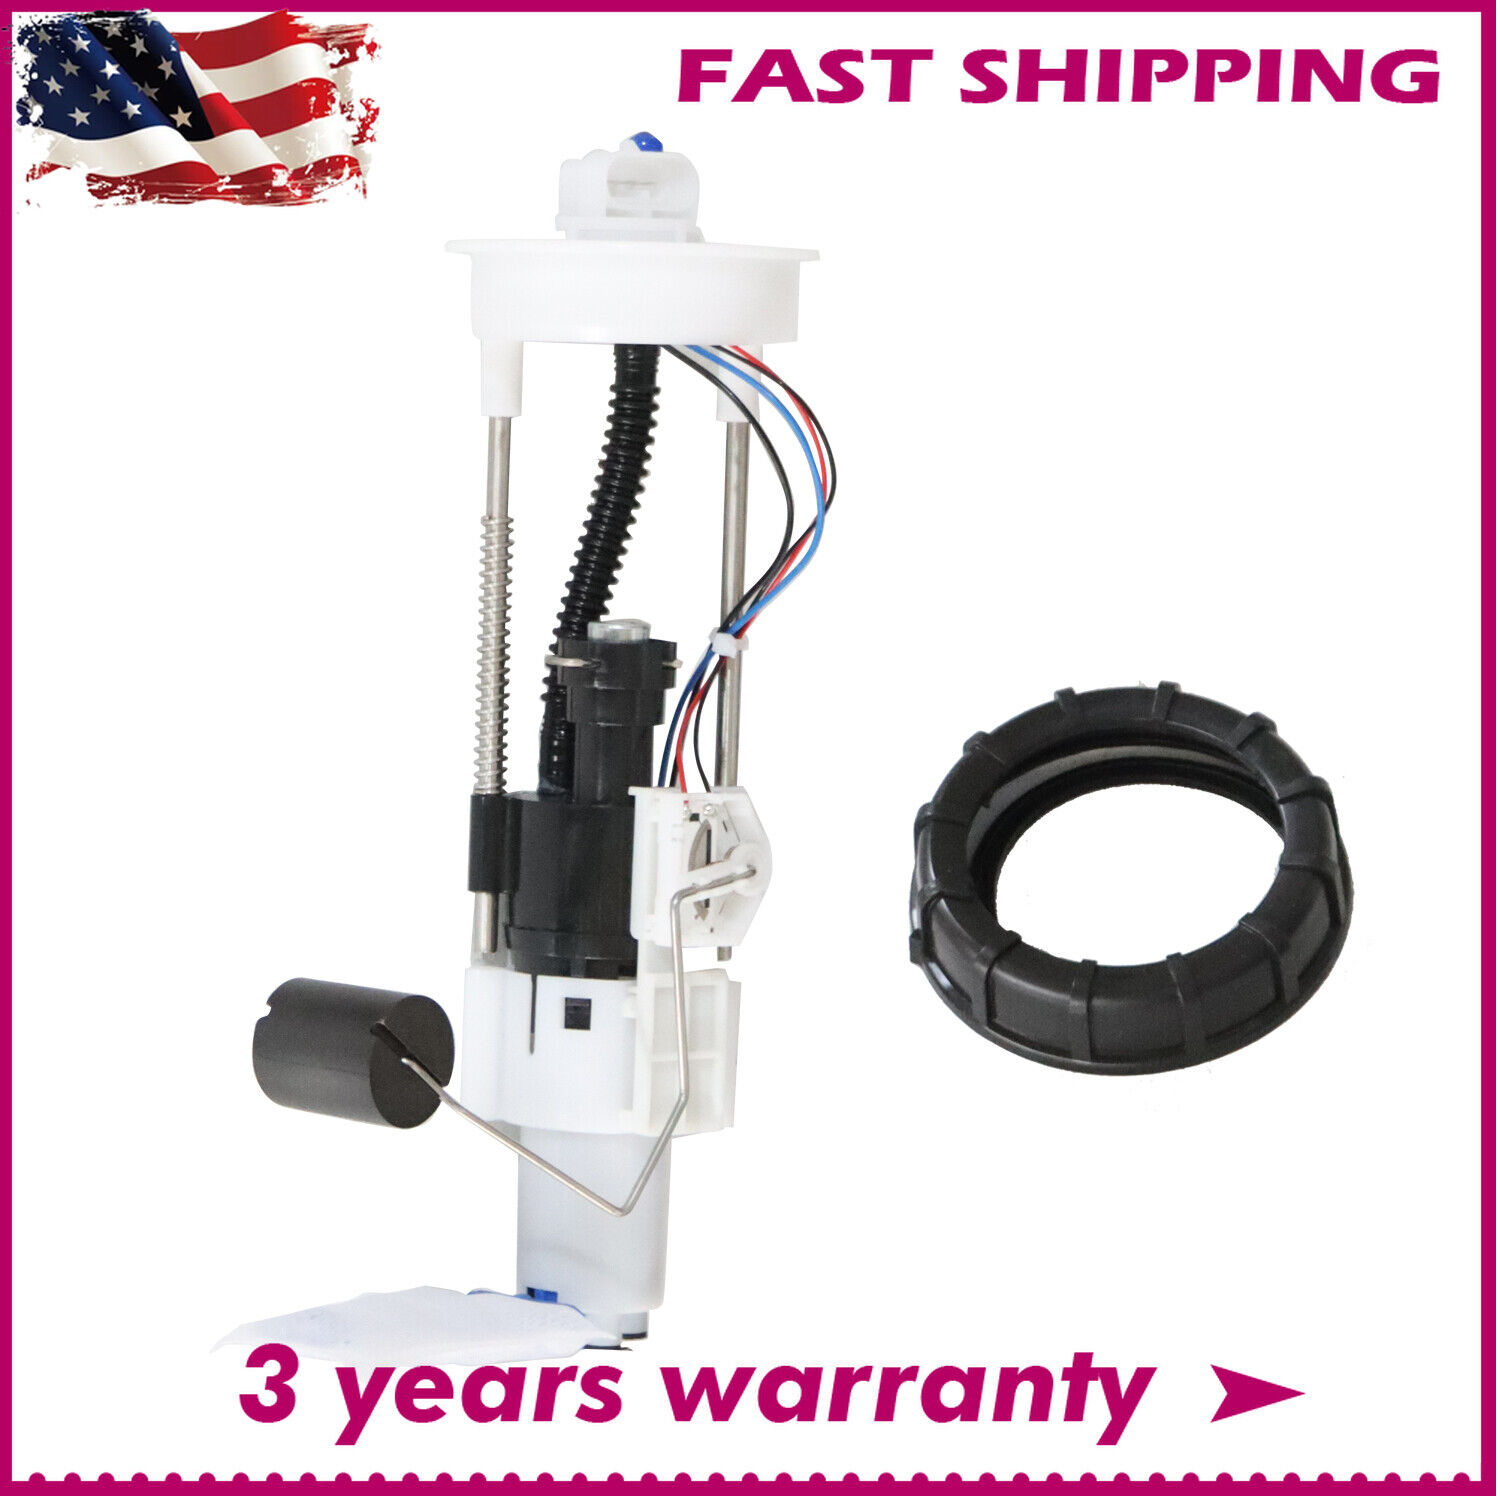 New 47-1007 Fuel Pump Assembly For Polaris RZR 900 XP 2011 2012 2013 2014